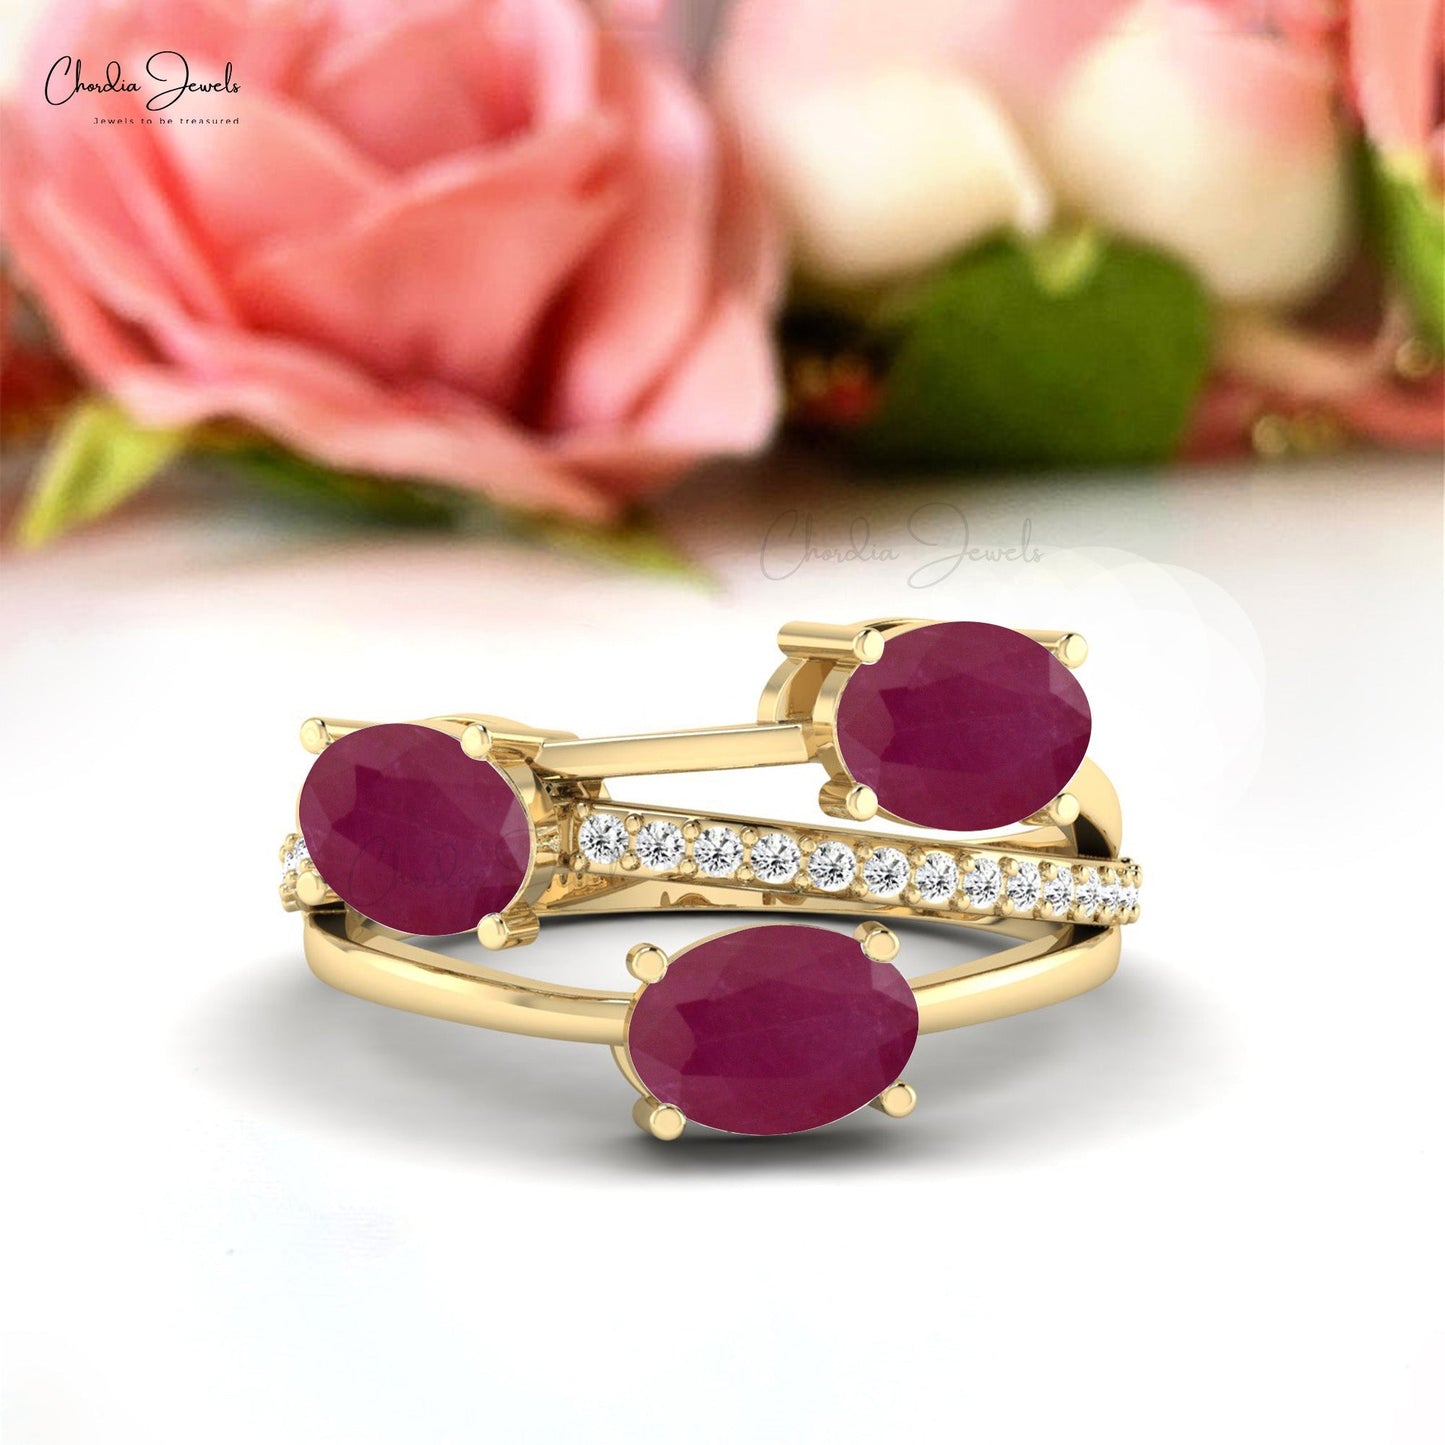 Crossover Oval Cut Red Ruby Three Stone Wedding Ring With Diamond Accent